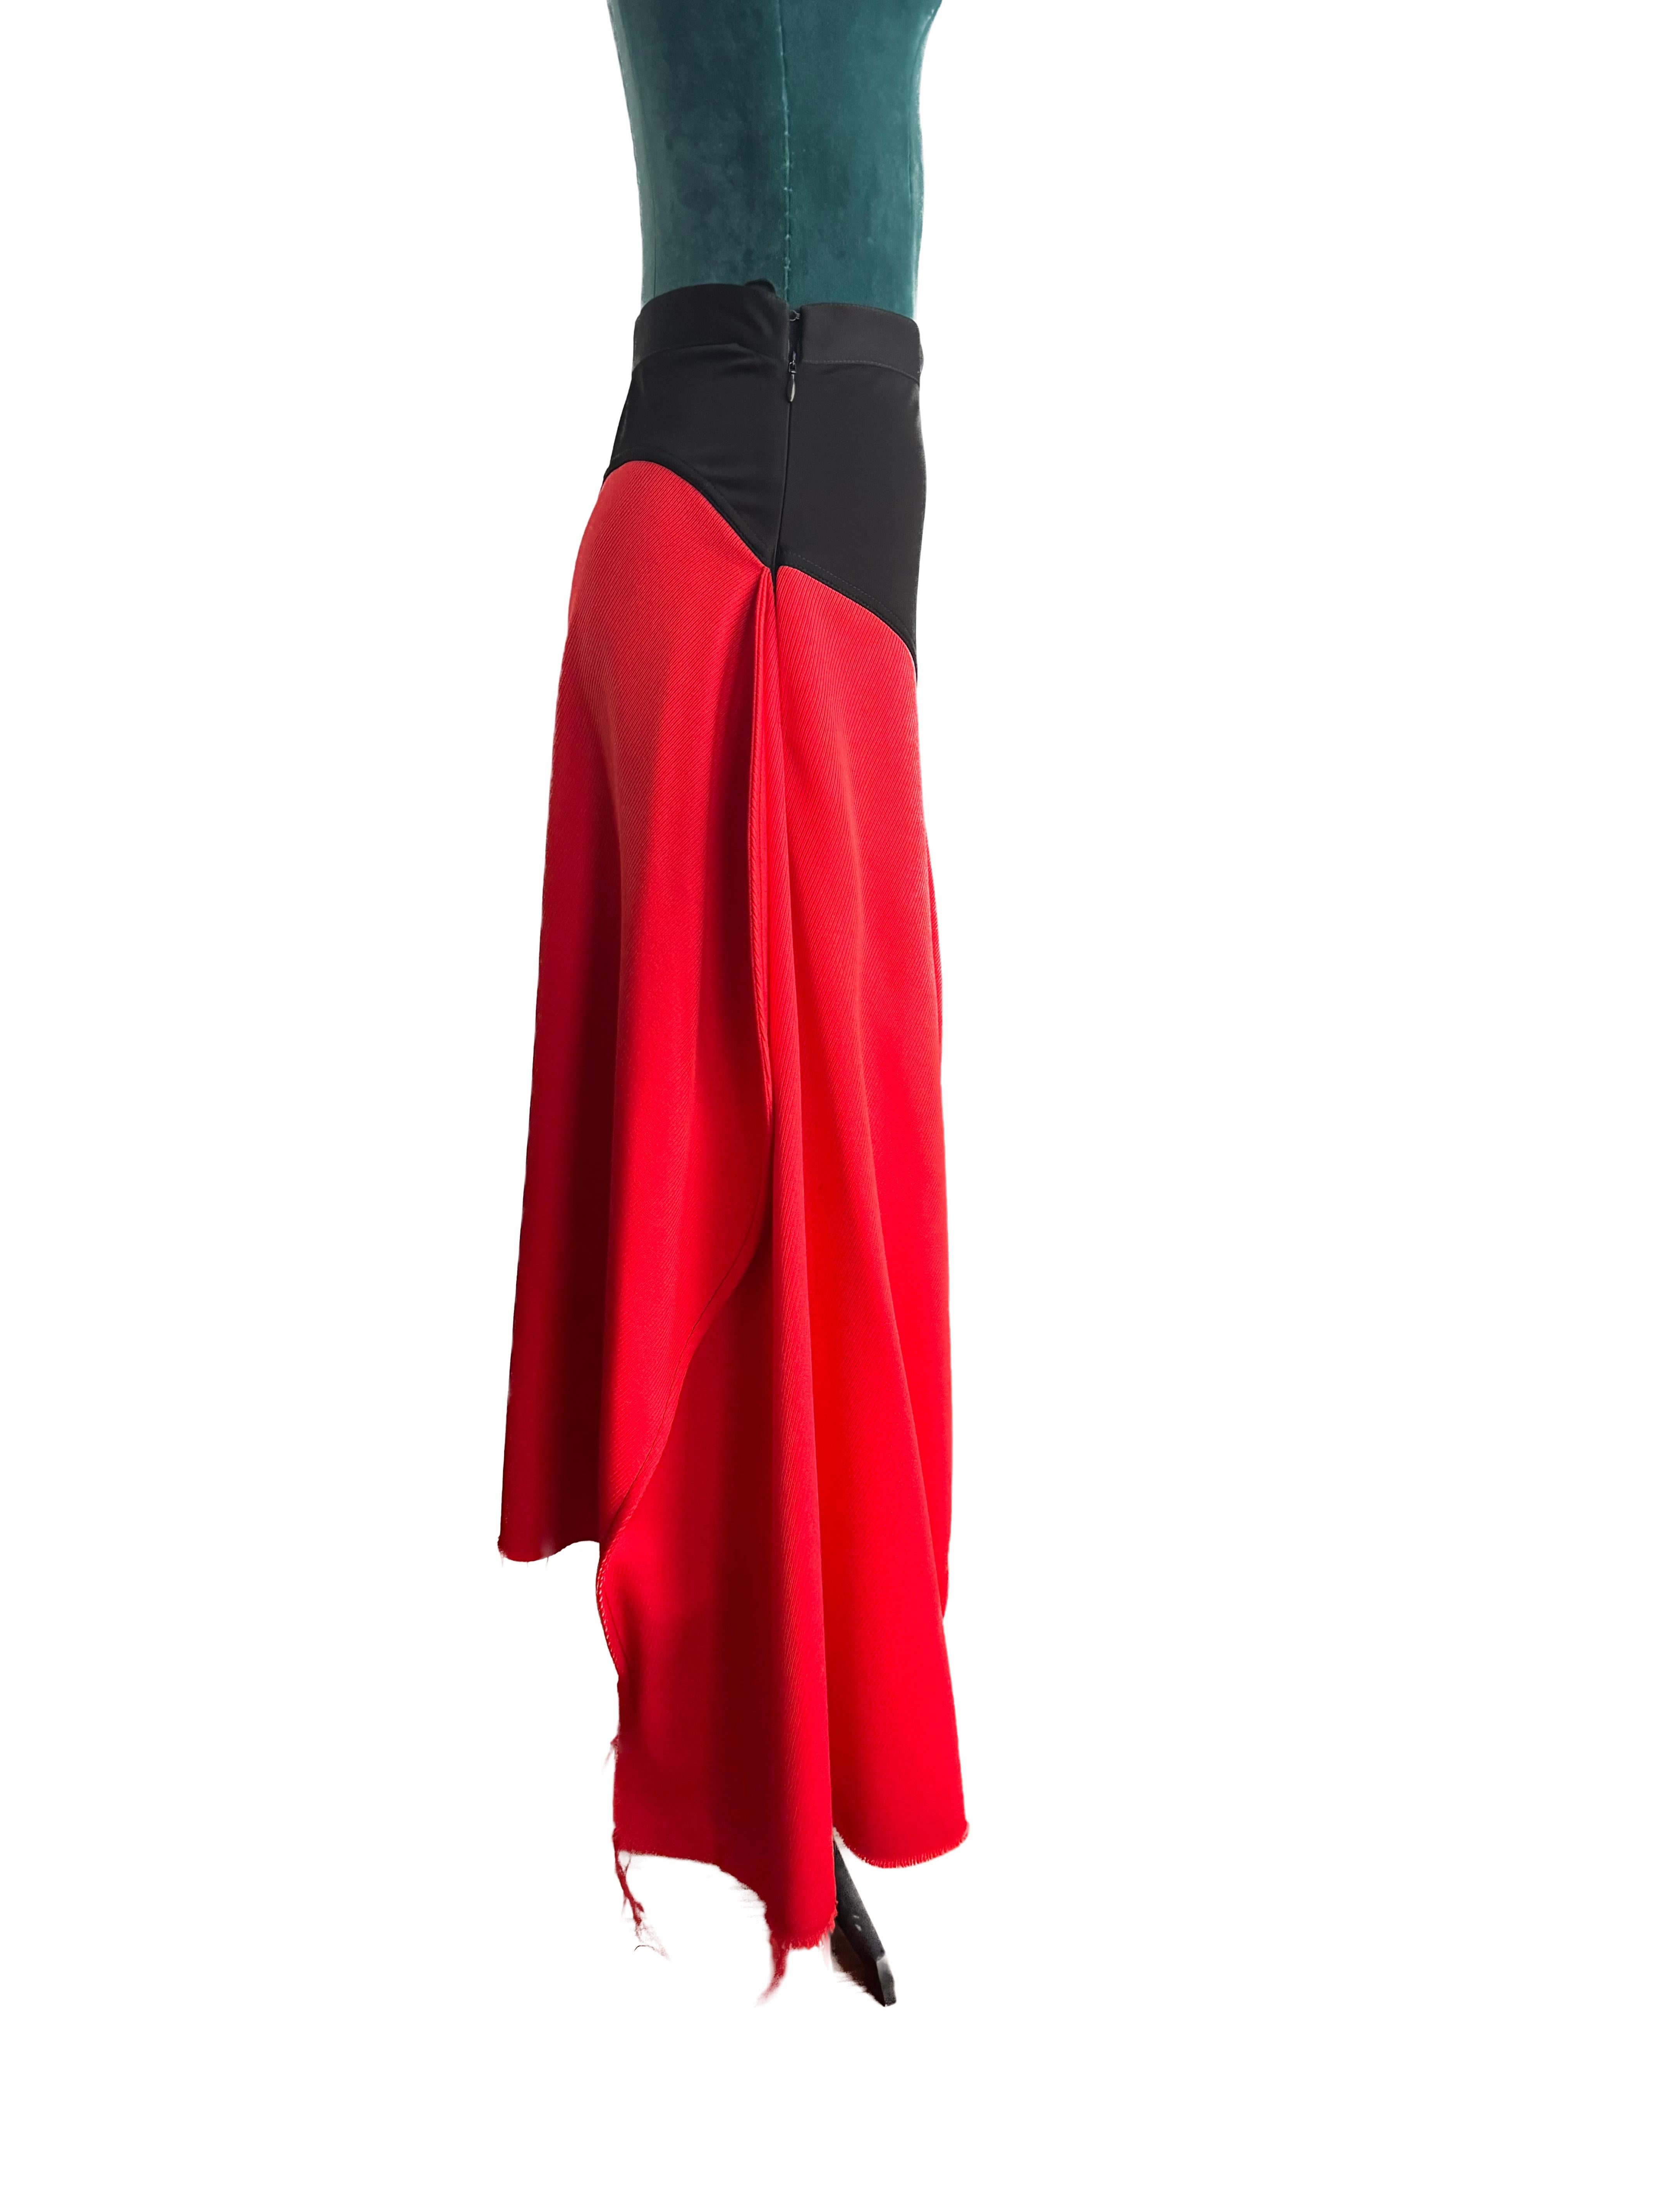 In the Celine 2017 runway collection, there was a striking black maxi skirt with contrasting red details, designed in a size 36. This piece showcased a modern and sophisticated take on a classic silhouette.

The black maxi skirt served as a canvas